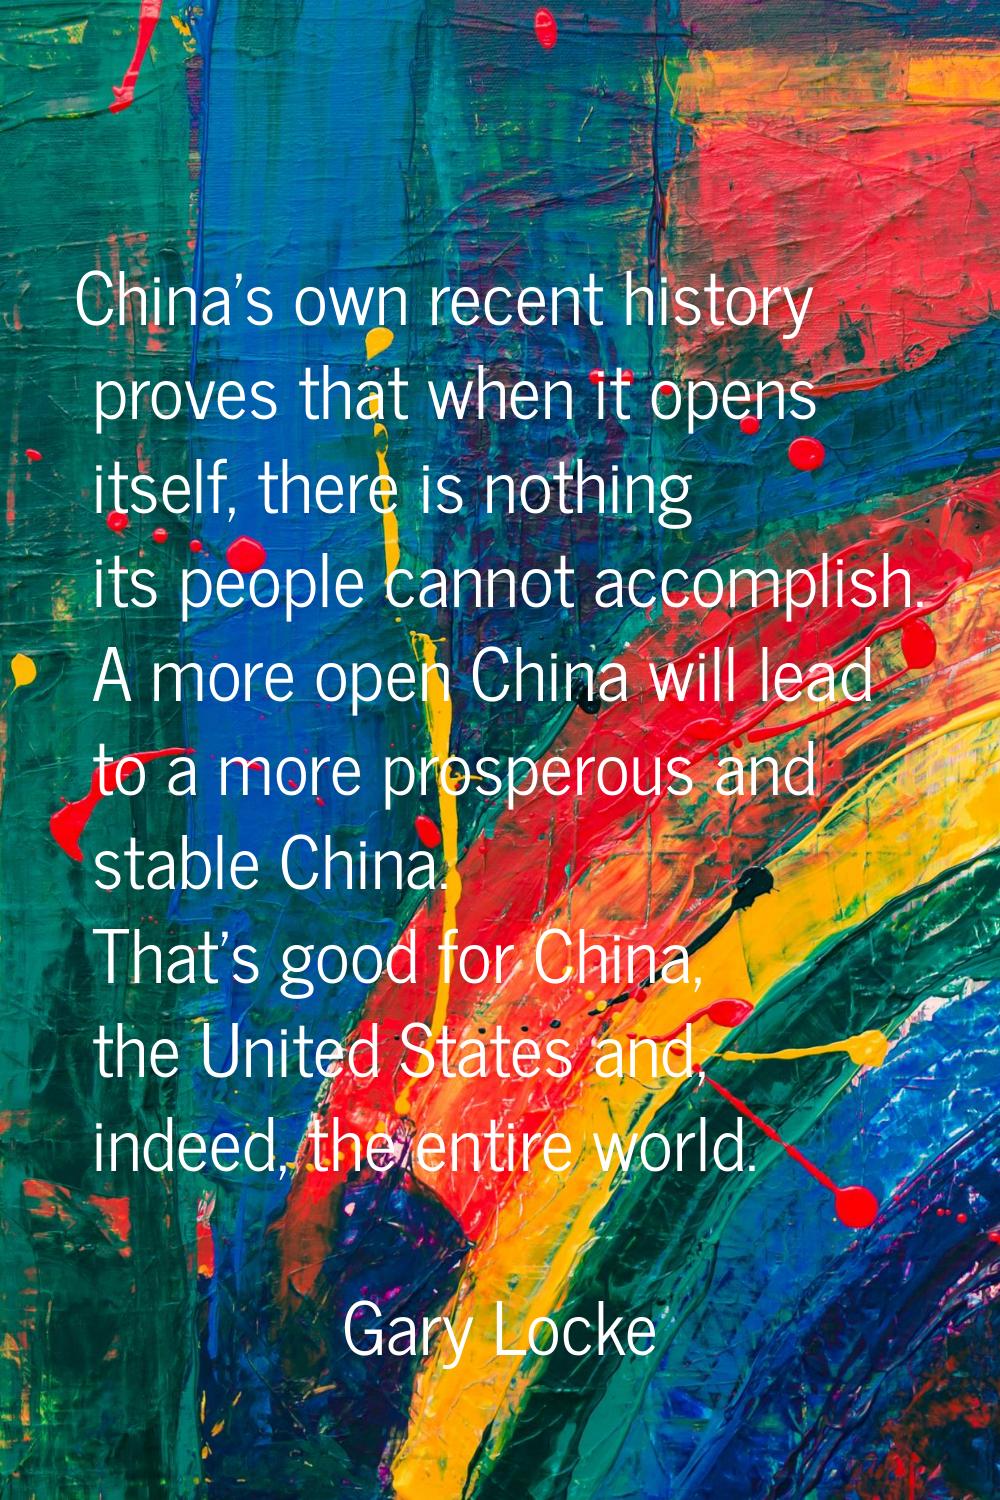 China's own recent history proves that when it opens itself, there is nothing its people cannot acc